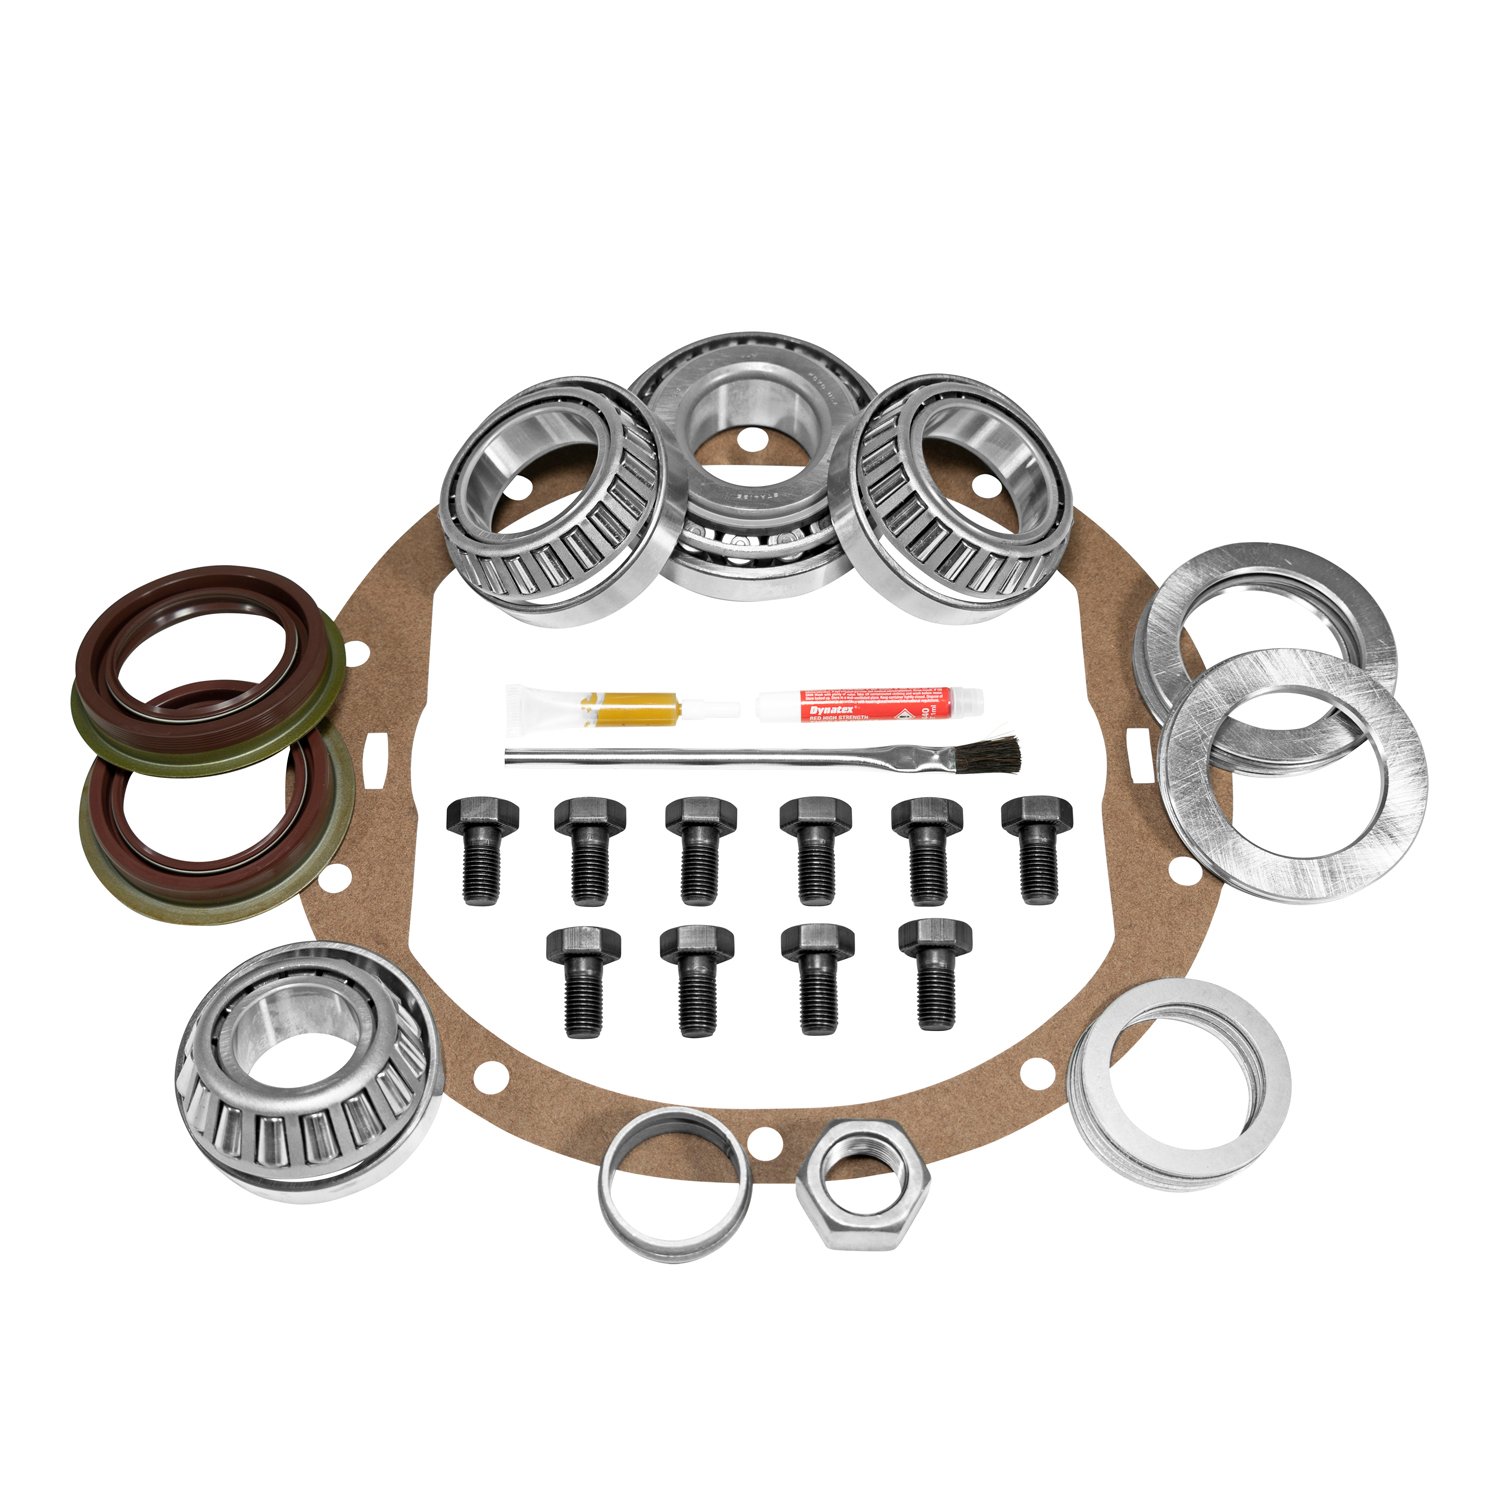 USA Standard ZK GM8.6-B Master Overhaul Kit, For The '09 And Newer GM 8.6 in. Differential